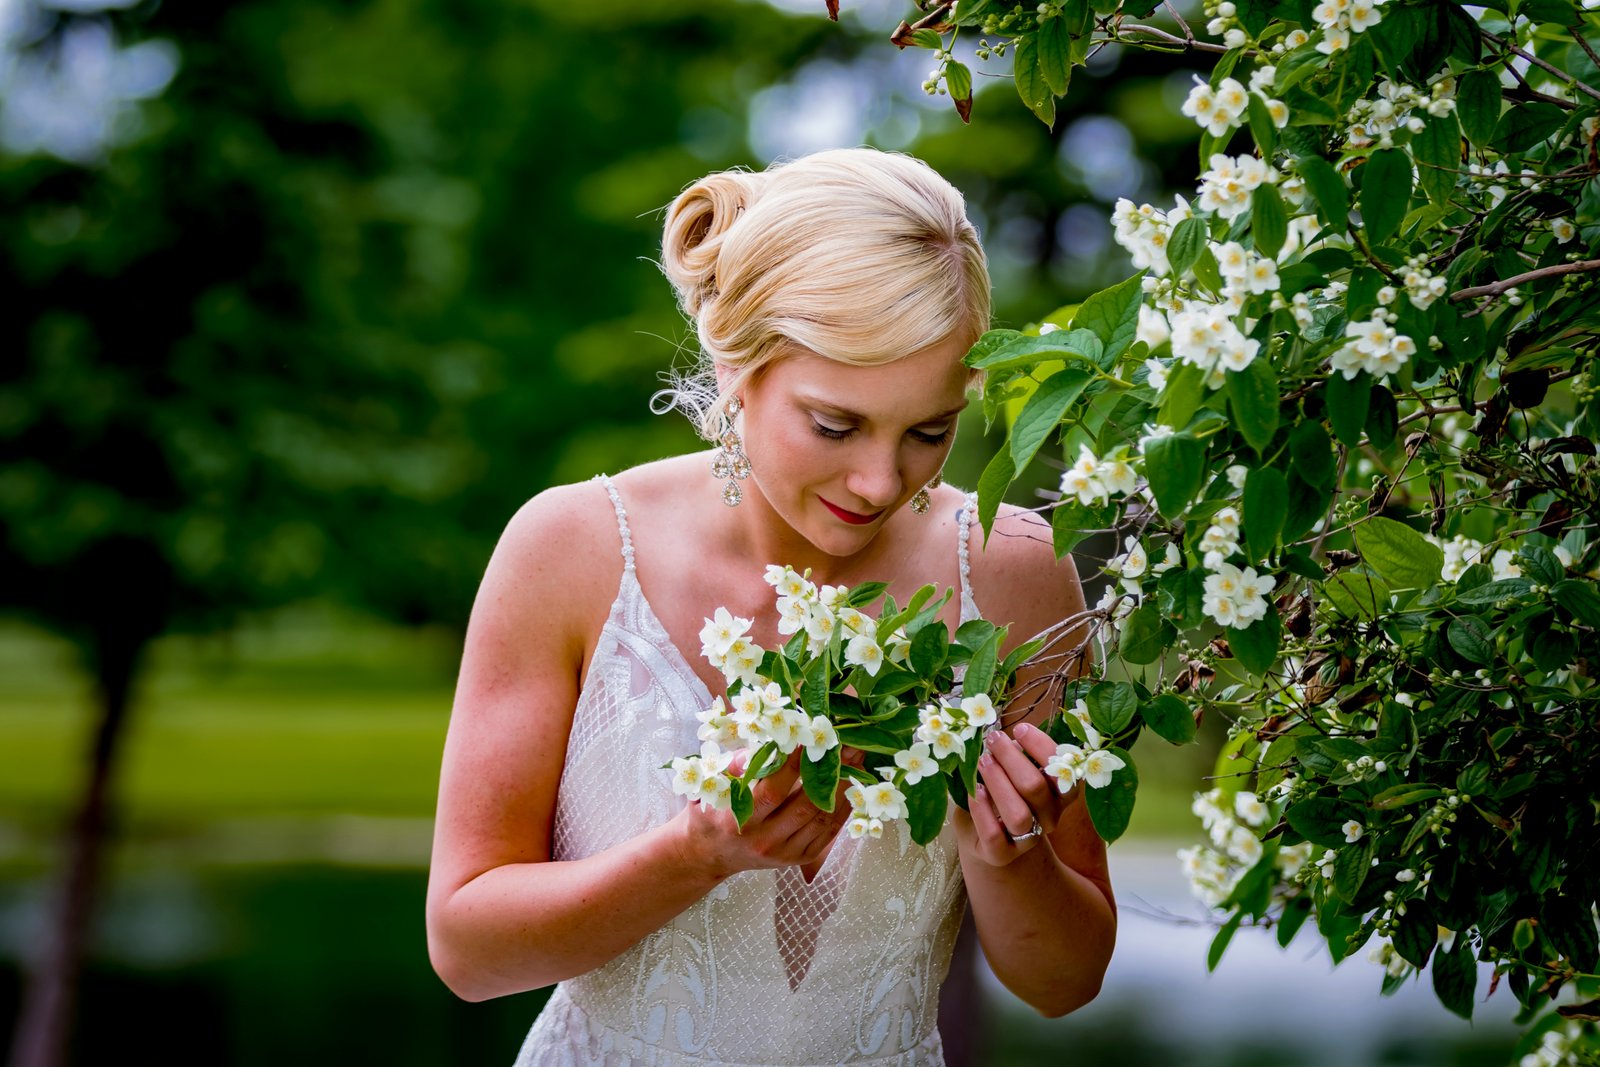 JS Weddings and Events, a Michigan and Mid West Wedding Planner. An earthy al fresco wedding style shoot with natural and organic elements.